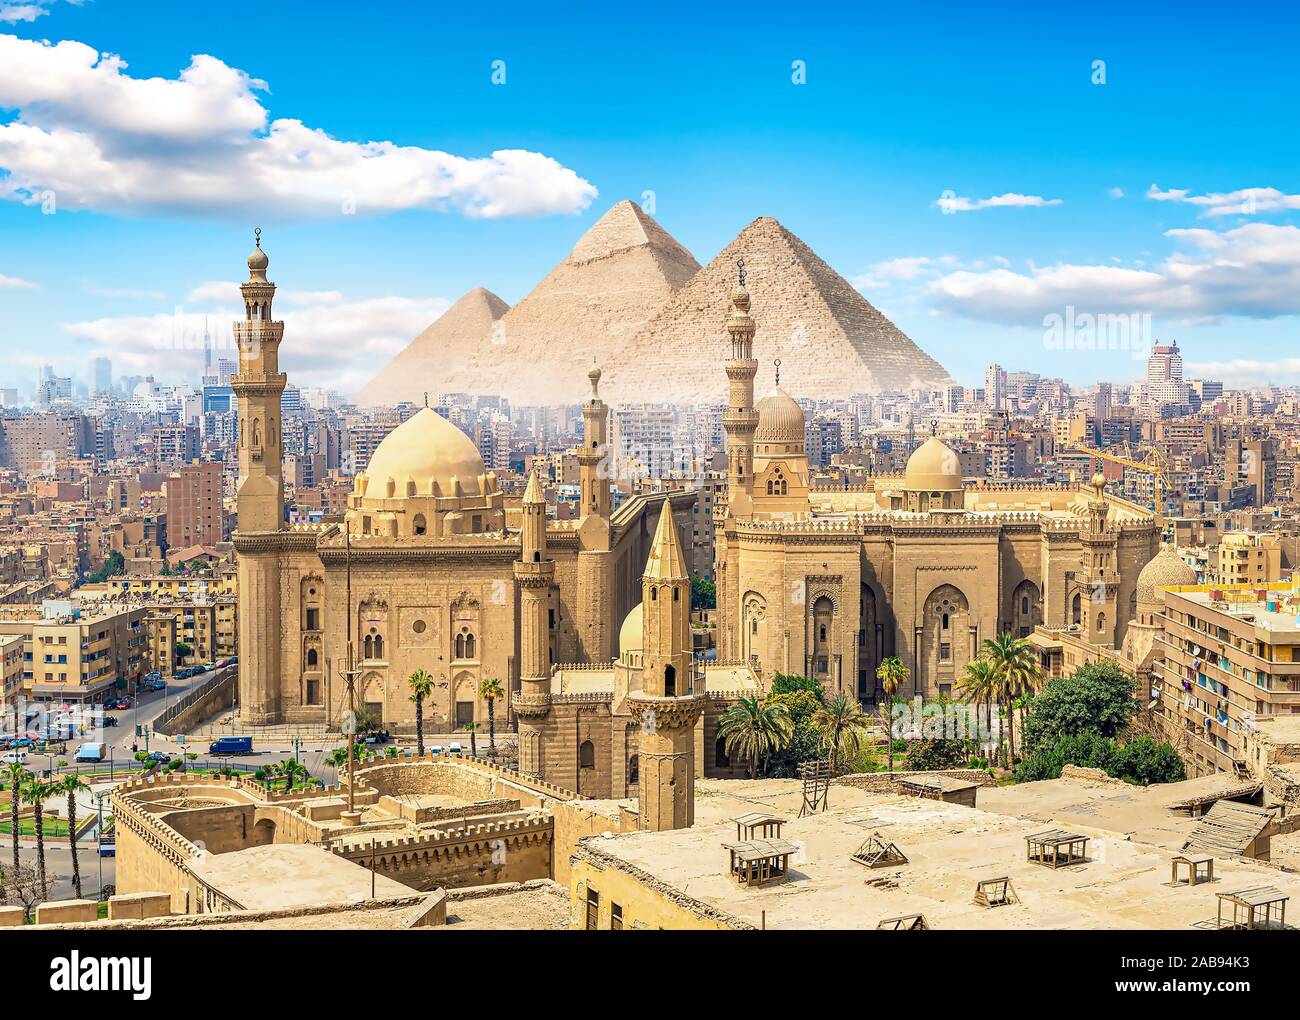 View of the Mosque Sultan Hassan in Cairo and pyramids. Stock Photo